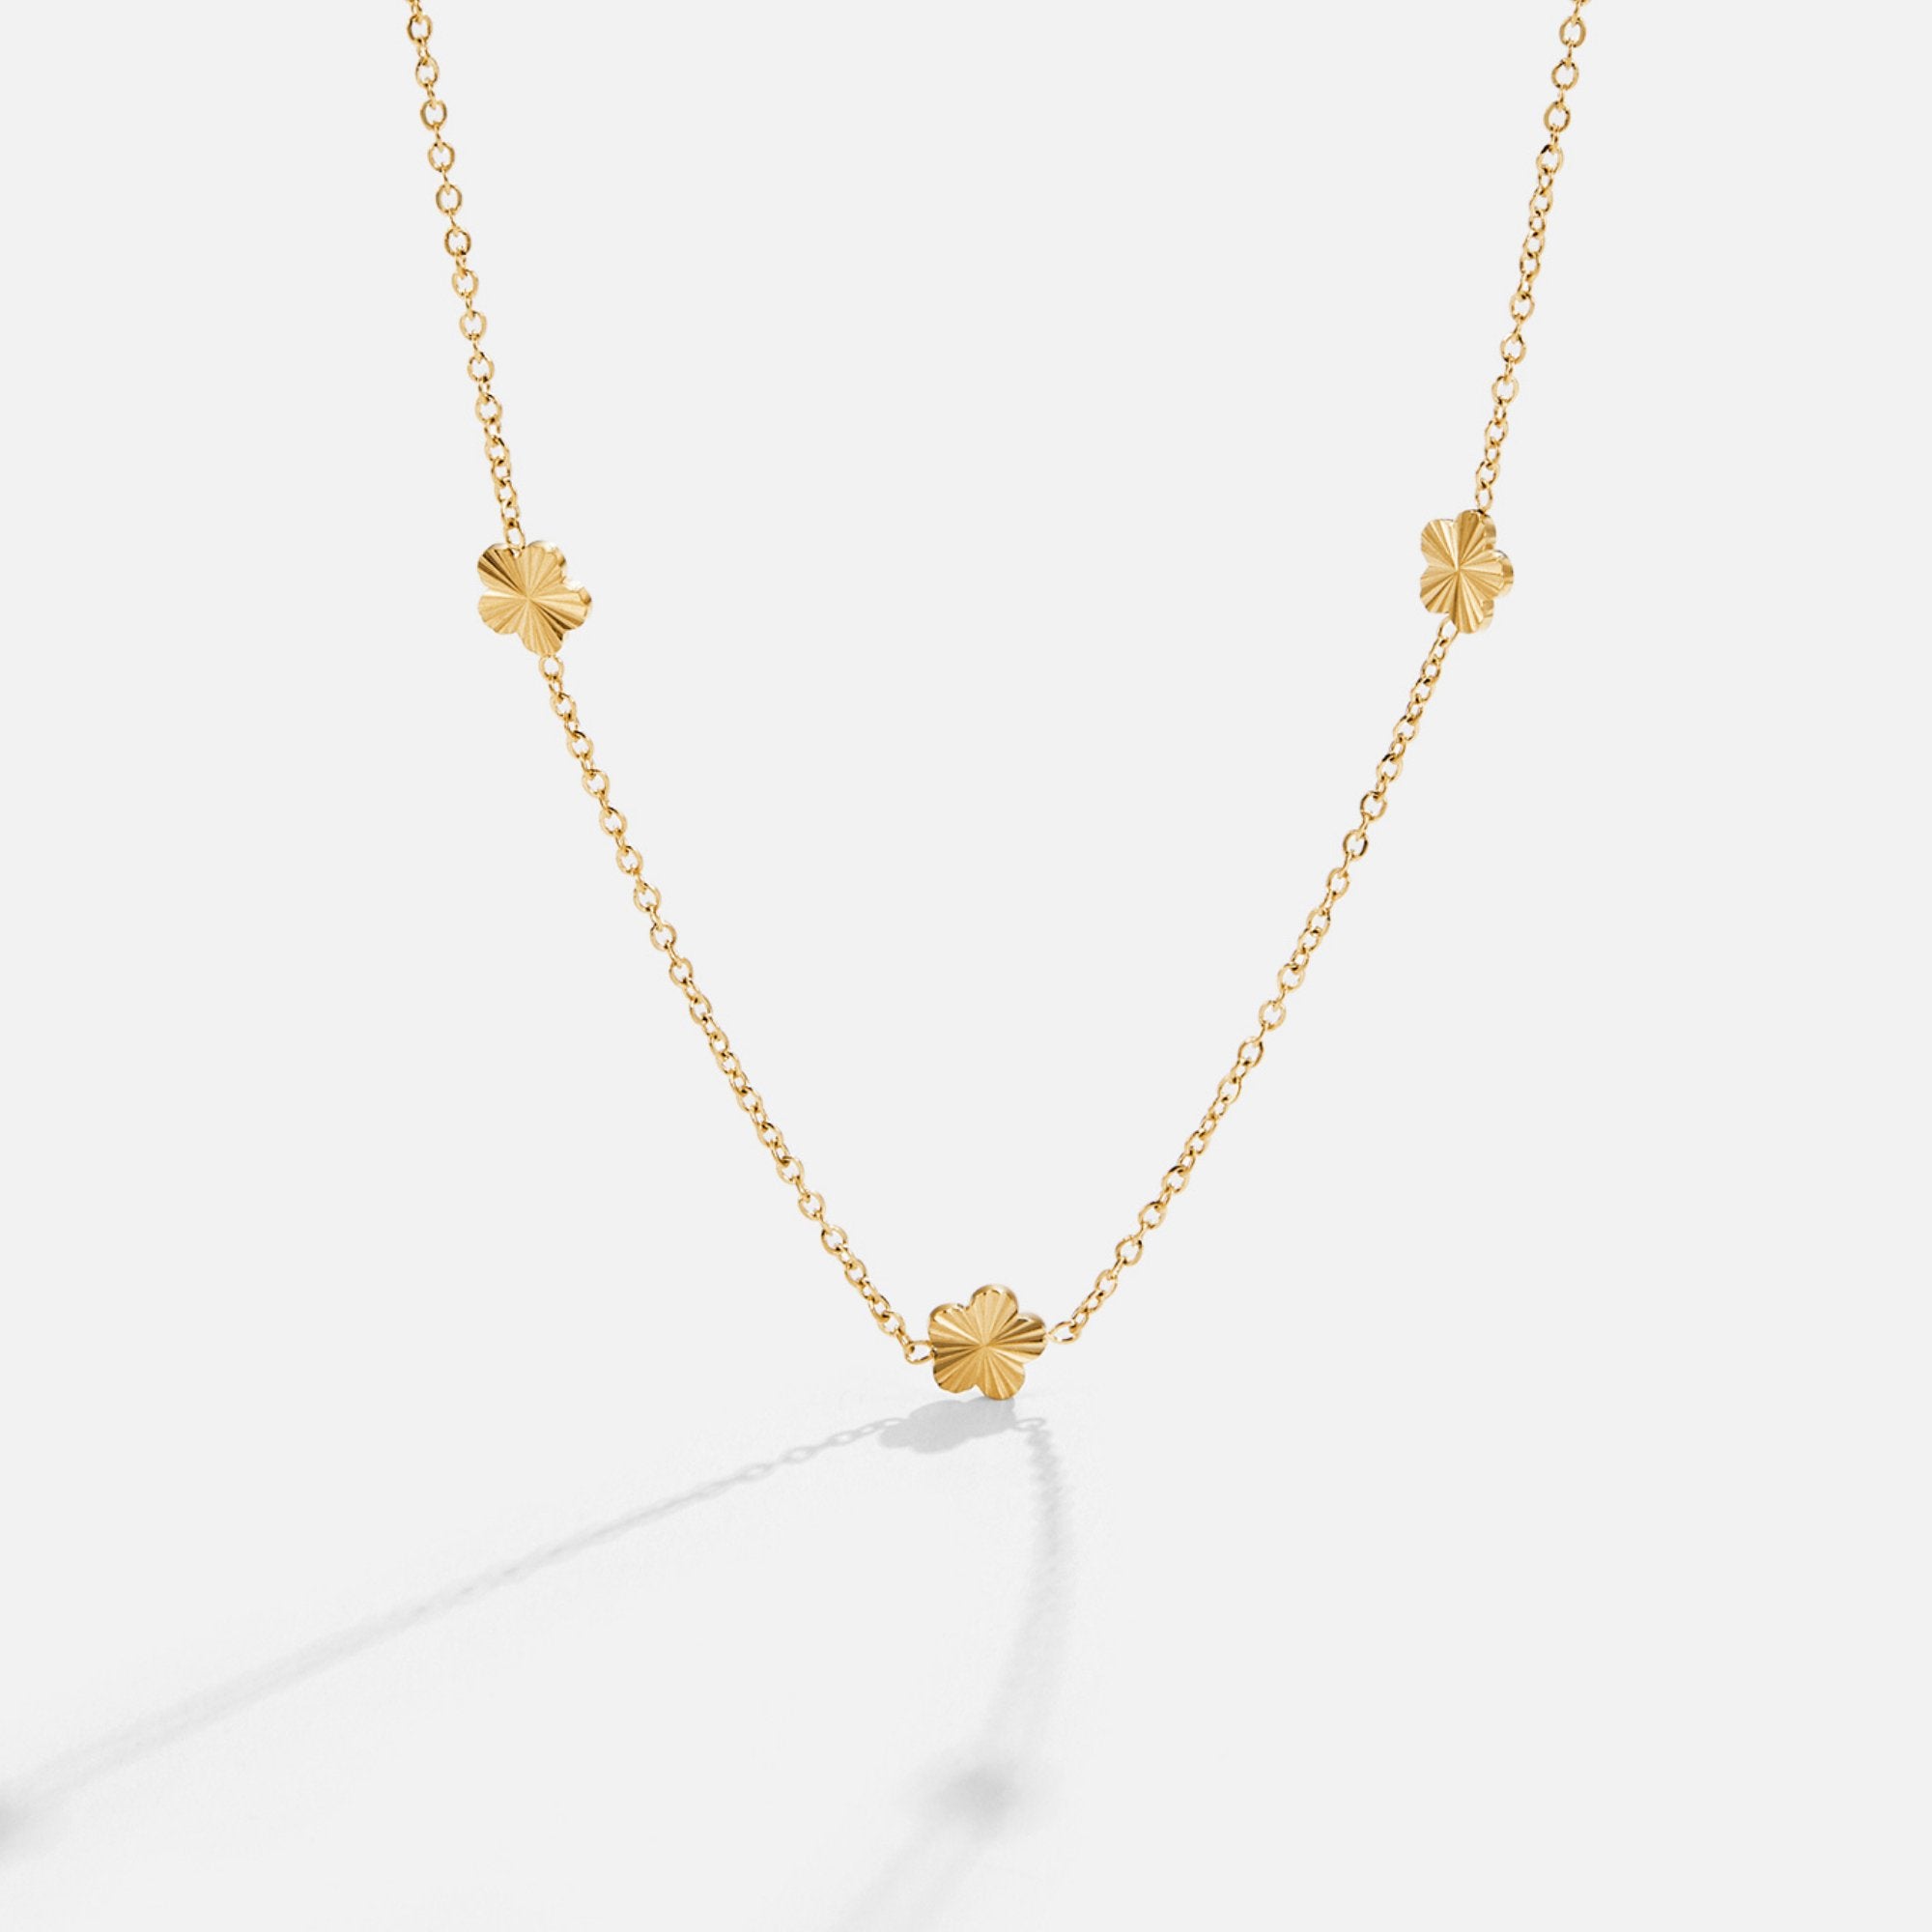 Clover Pendant Necklace - 18K Gold Plated - Waterproof - Tarnish